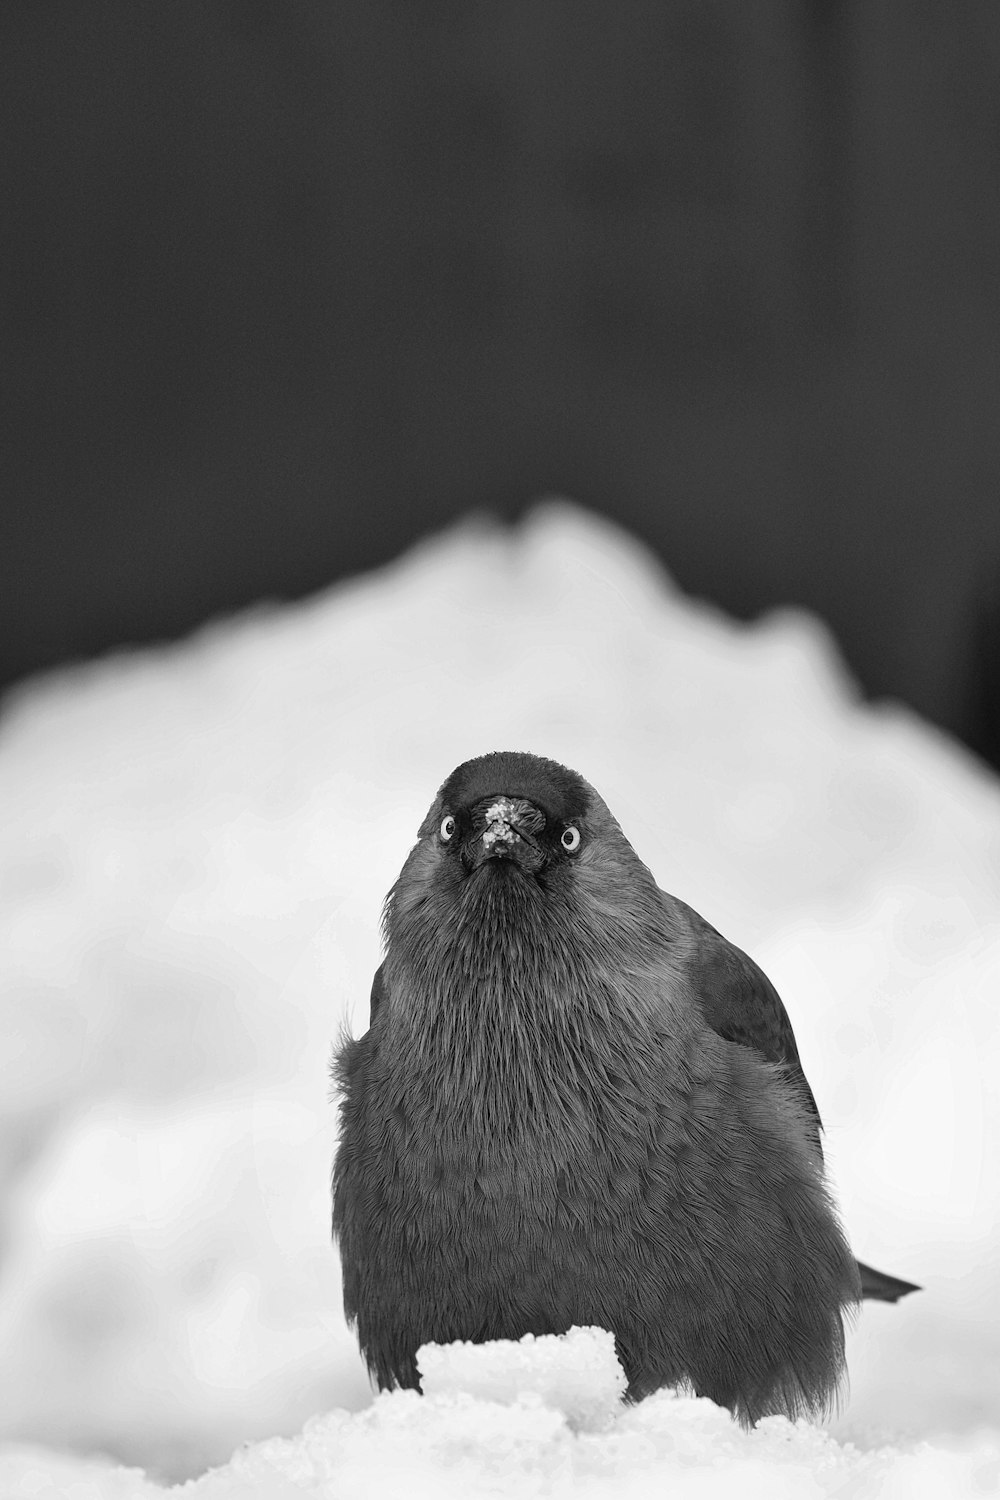 black and gray bird on snow covered ground